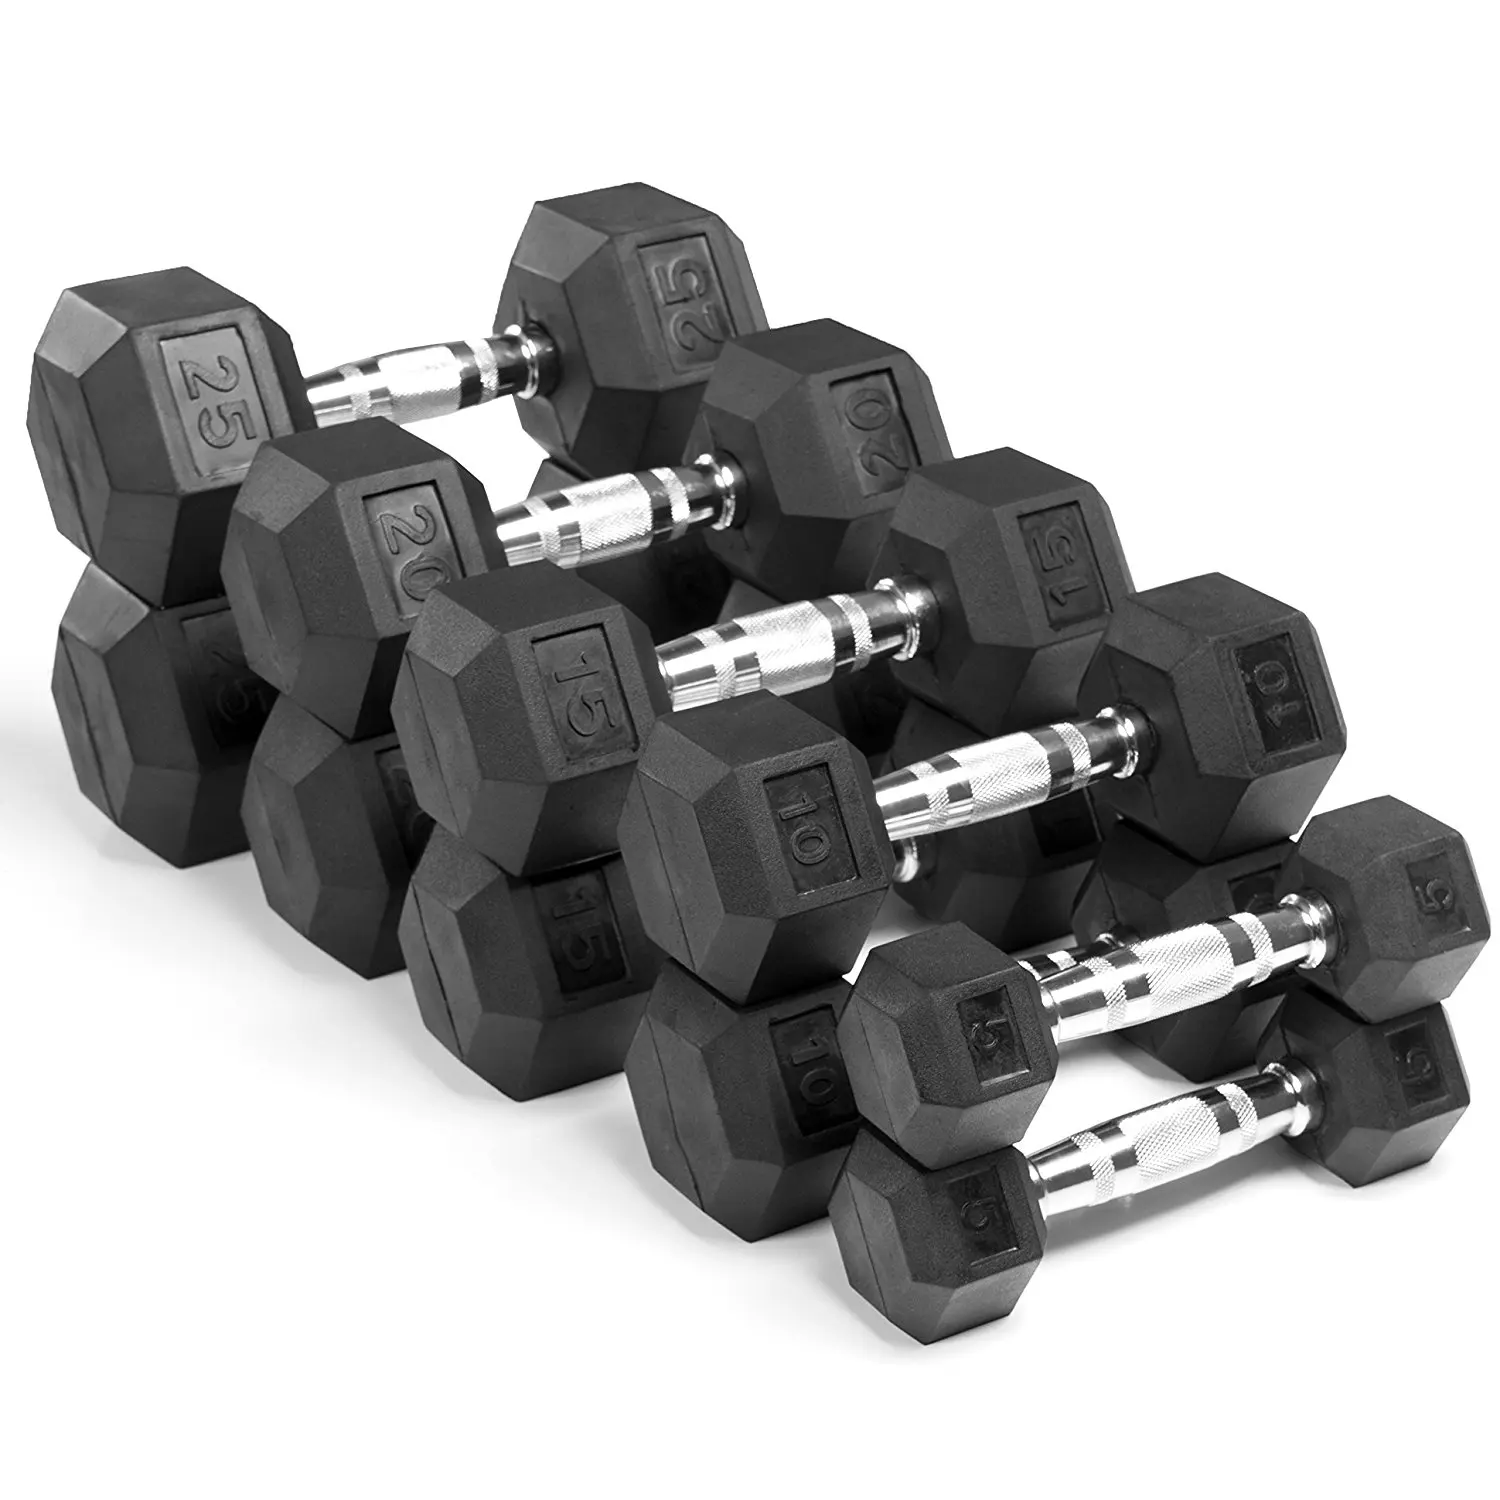 weight lifting dumbbells